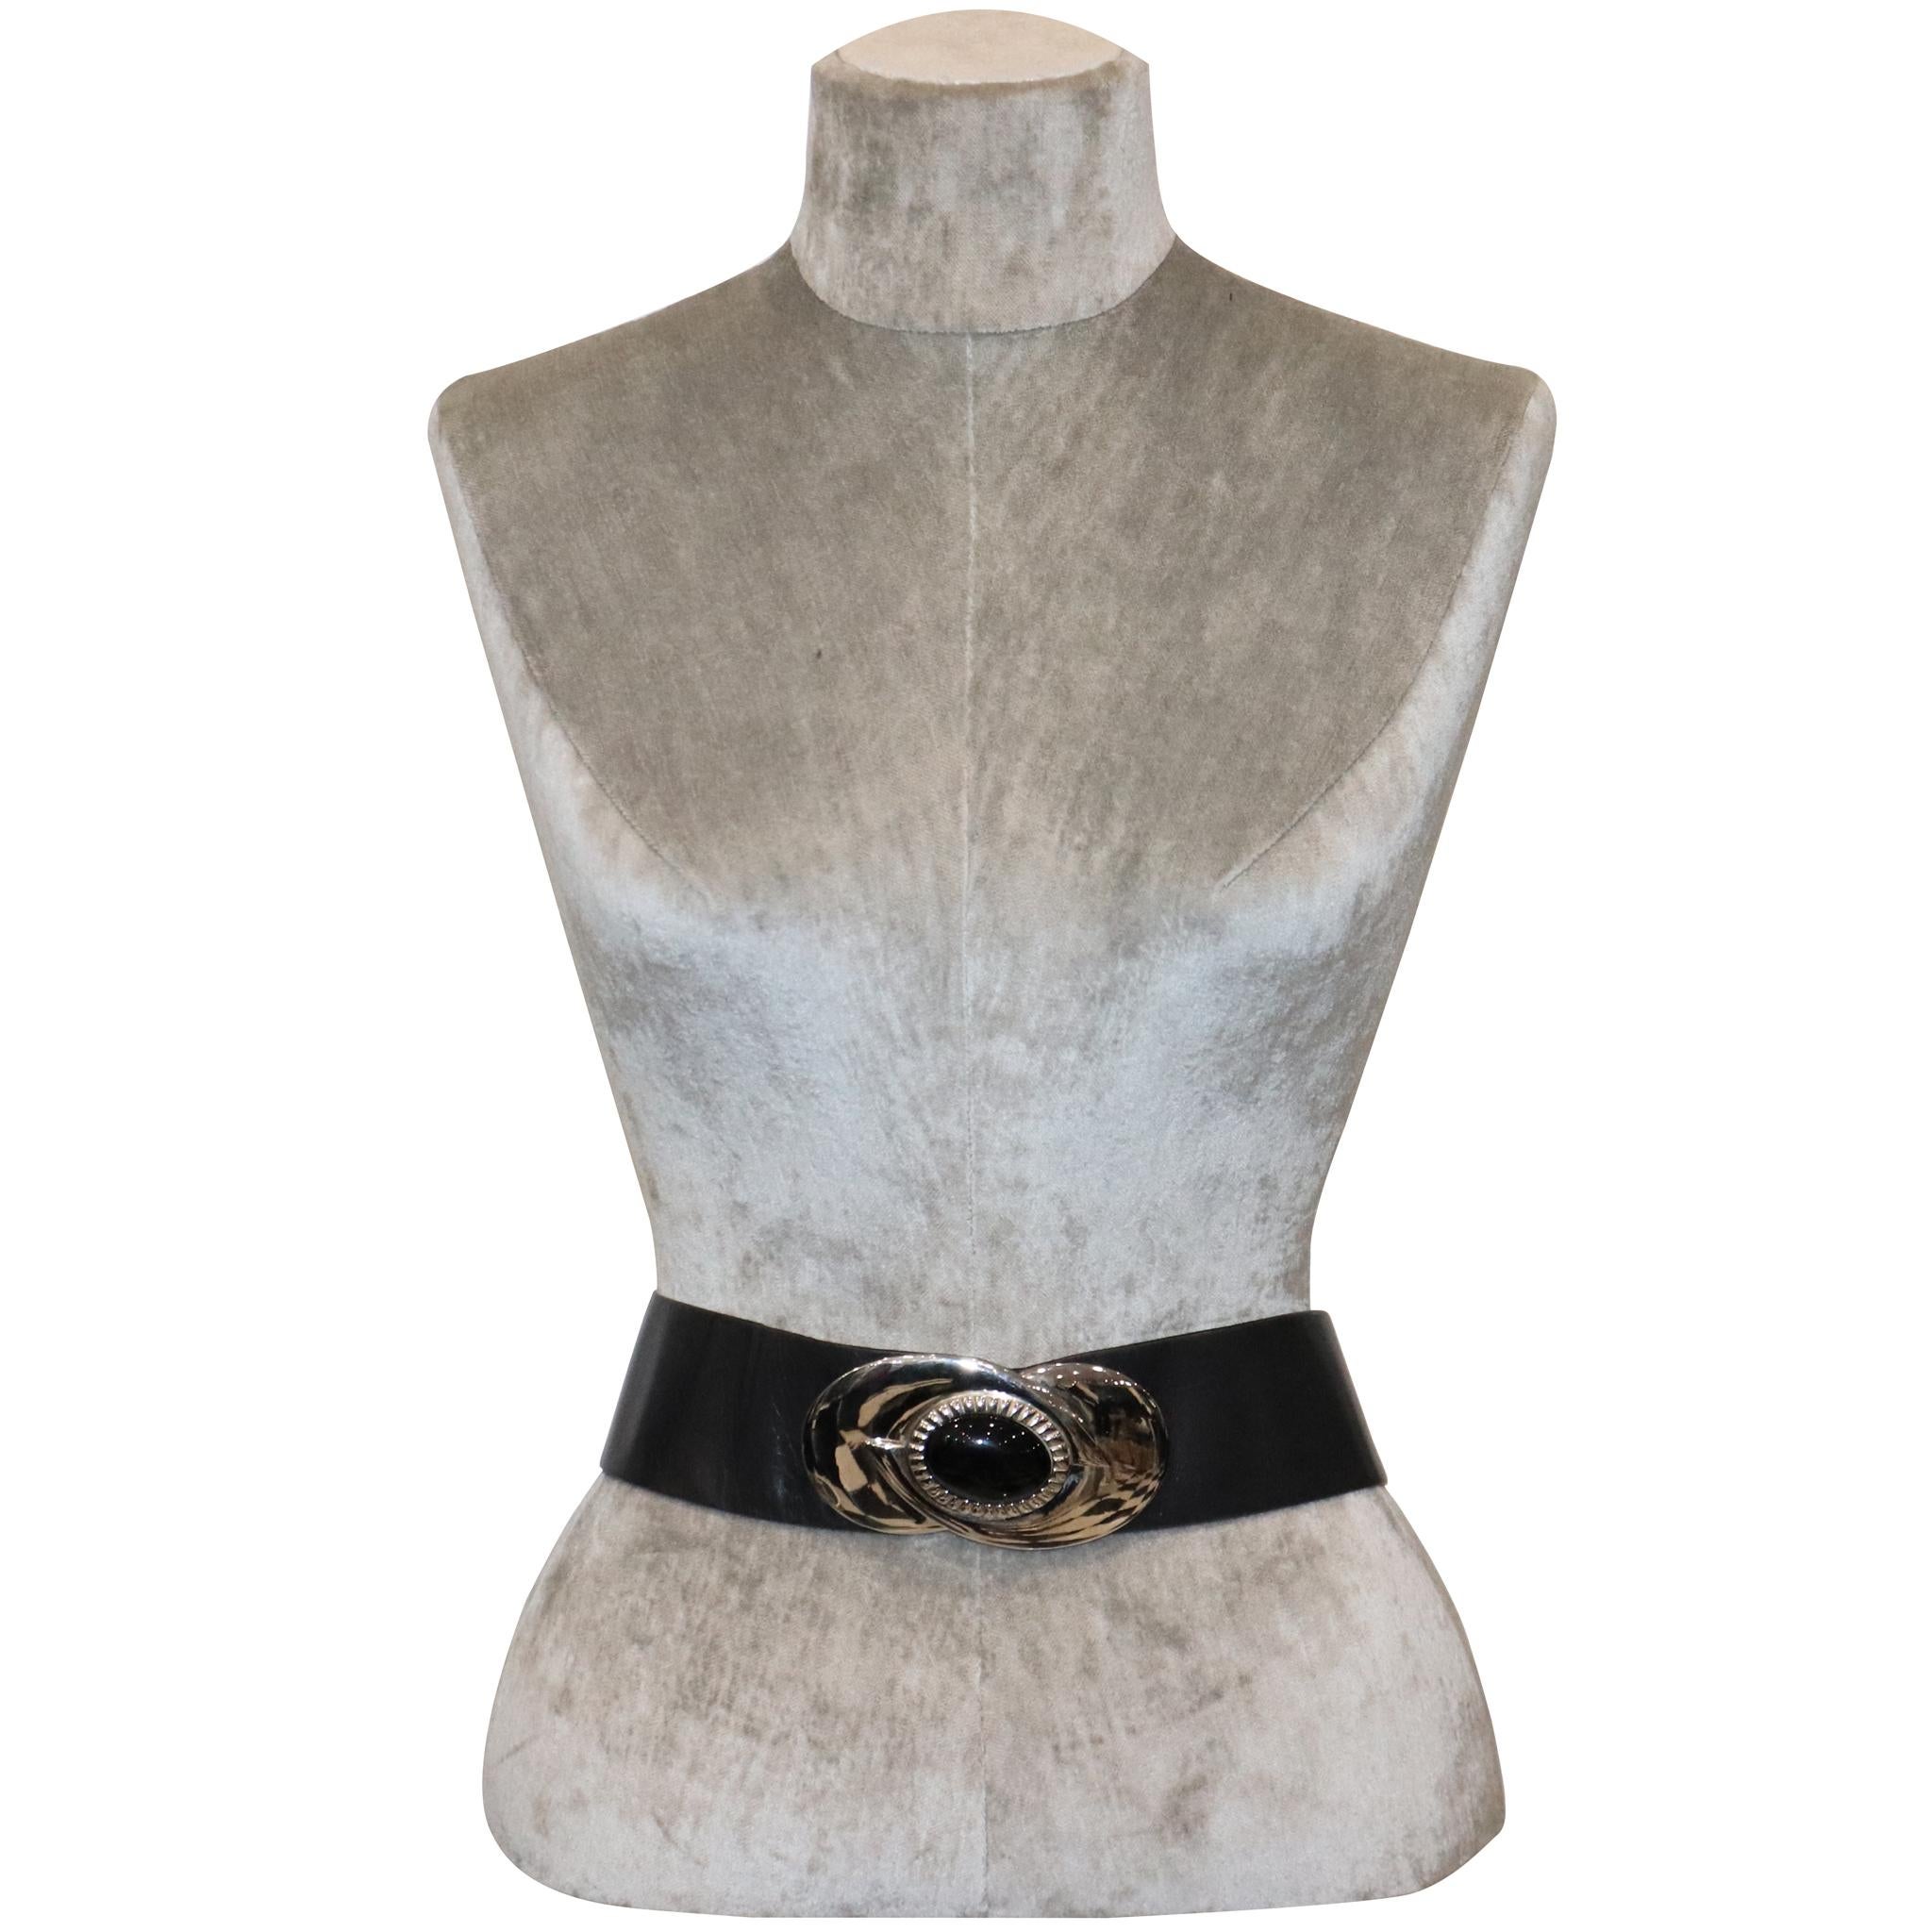 Judith Leiber Black Wide Leather Belt W/ Silver Hardware. In excellent condition 

Measurements: 

Longest length - 34.8 inches

Shortest length - 28.5 inches

Height - 2.4 inches 